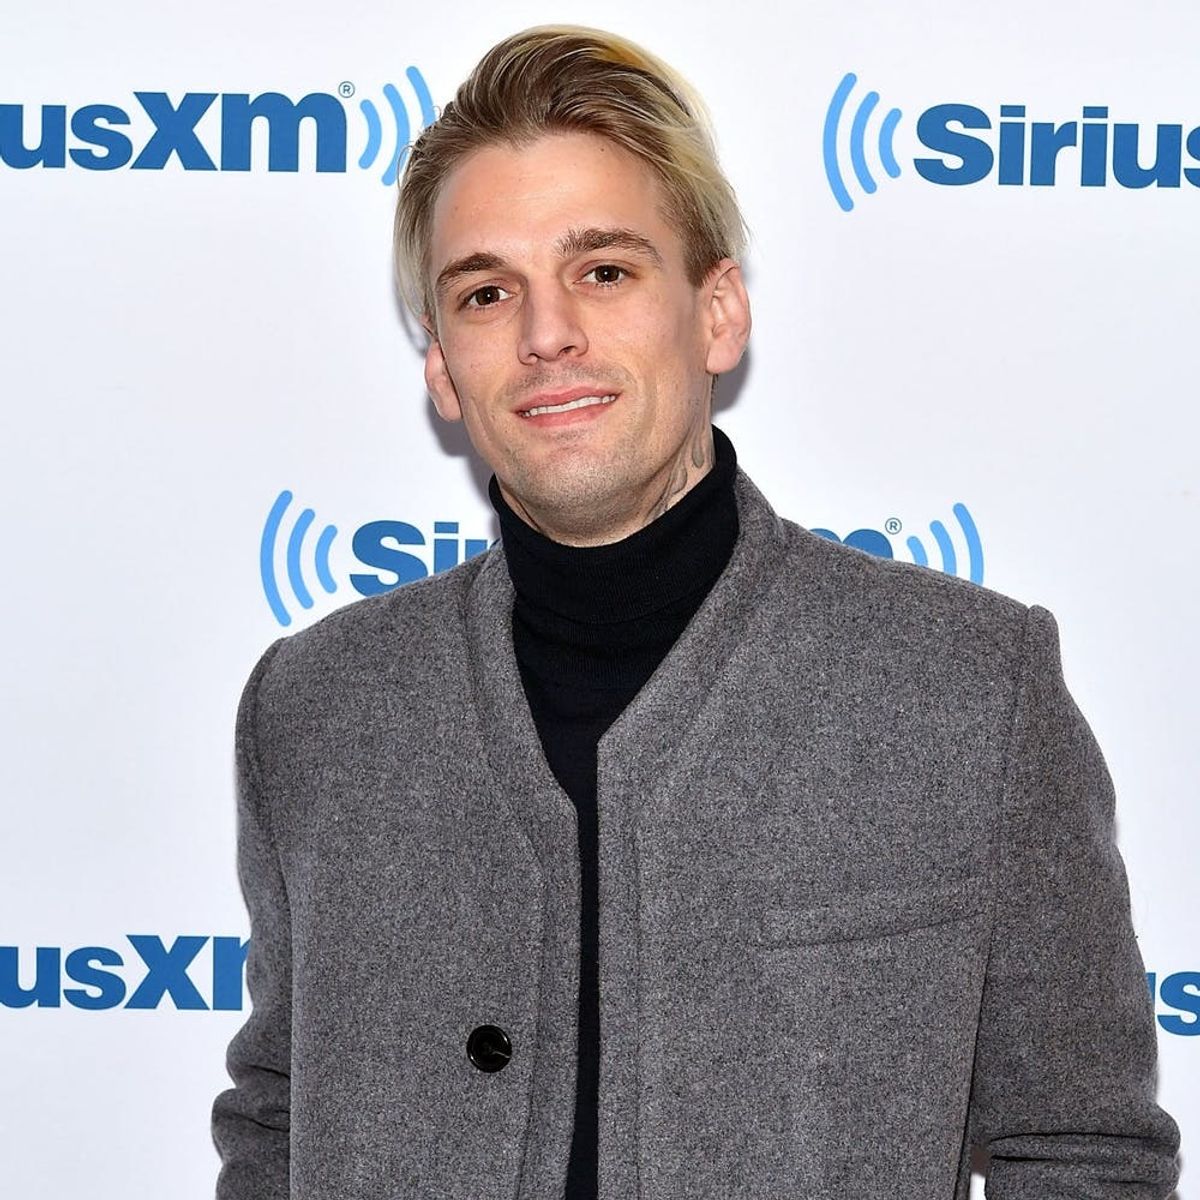 Aaron Carter Was Sent to the Hospital Over the Use of *This* Taboo Phrase